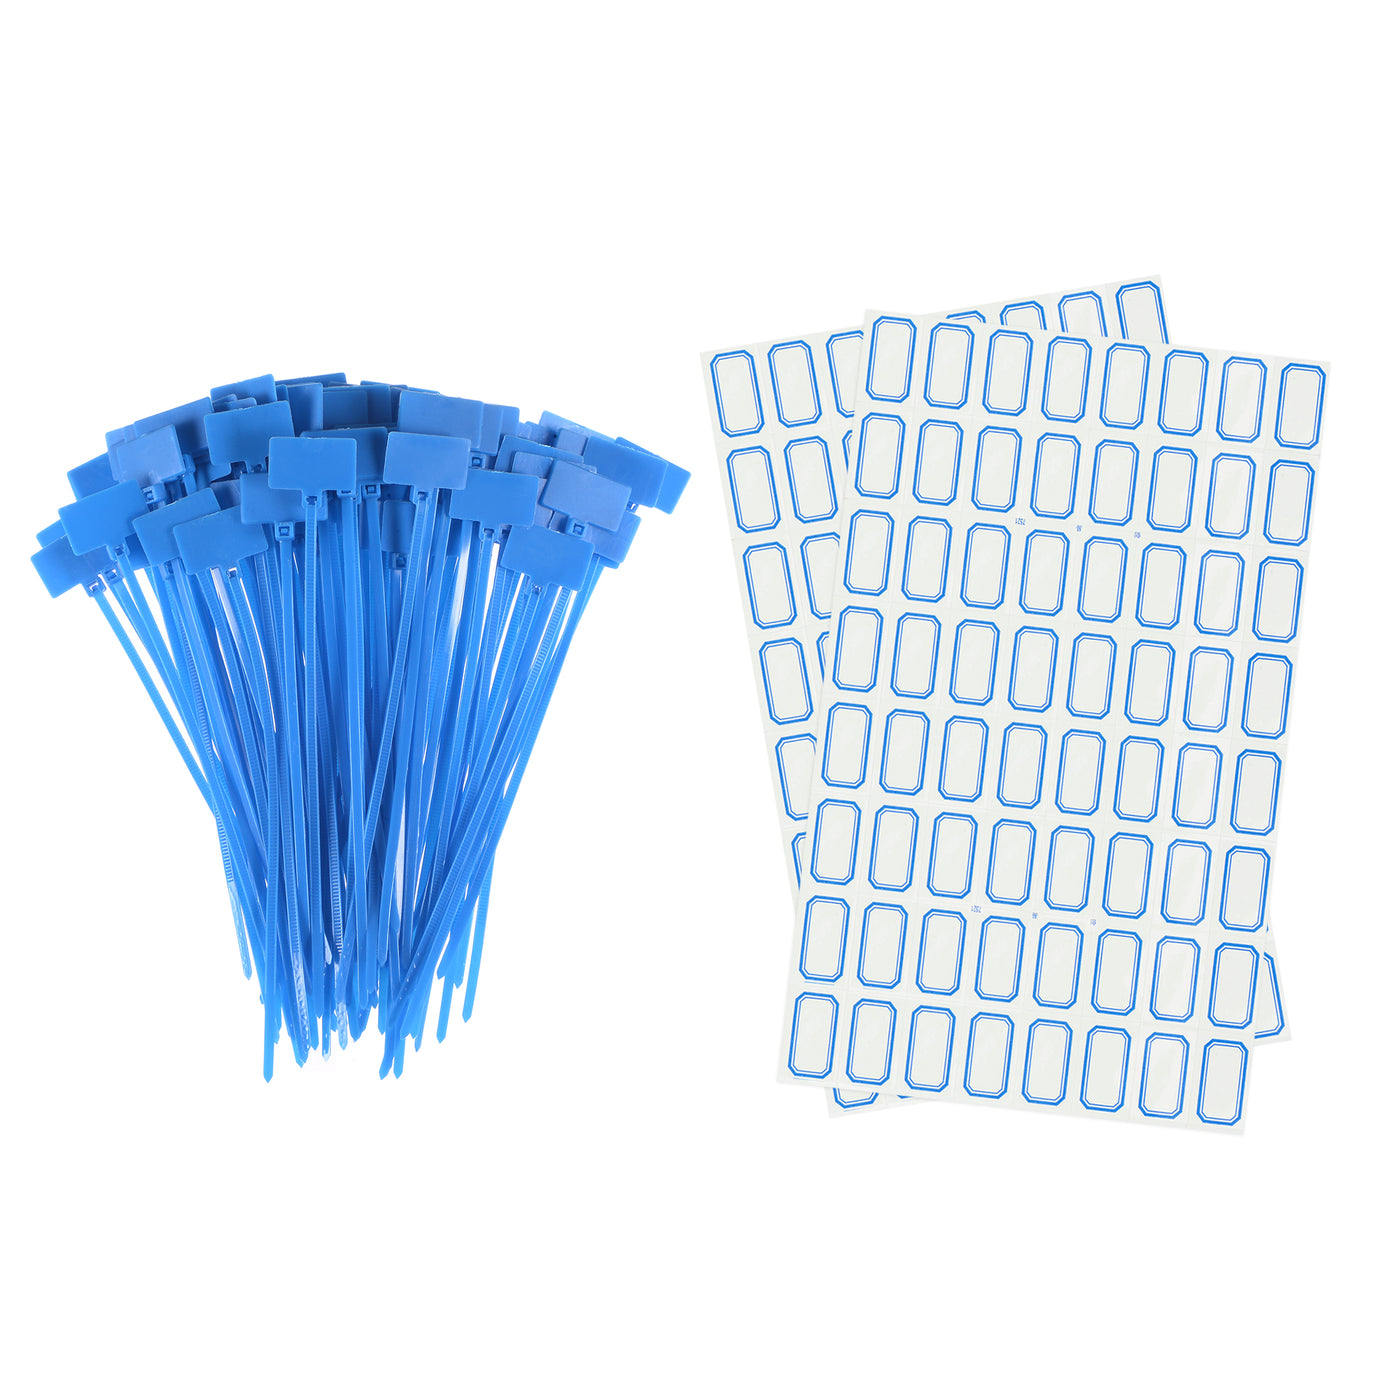 uxcell Uxcell 100pcs Nylon Cable Ties Tags Label Marker Self-Locking for Marking Organizing Blue